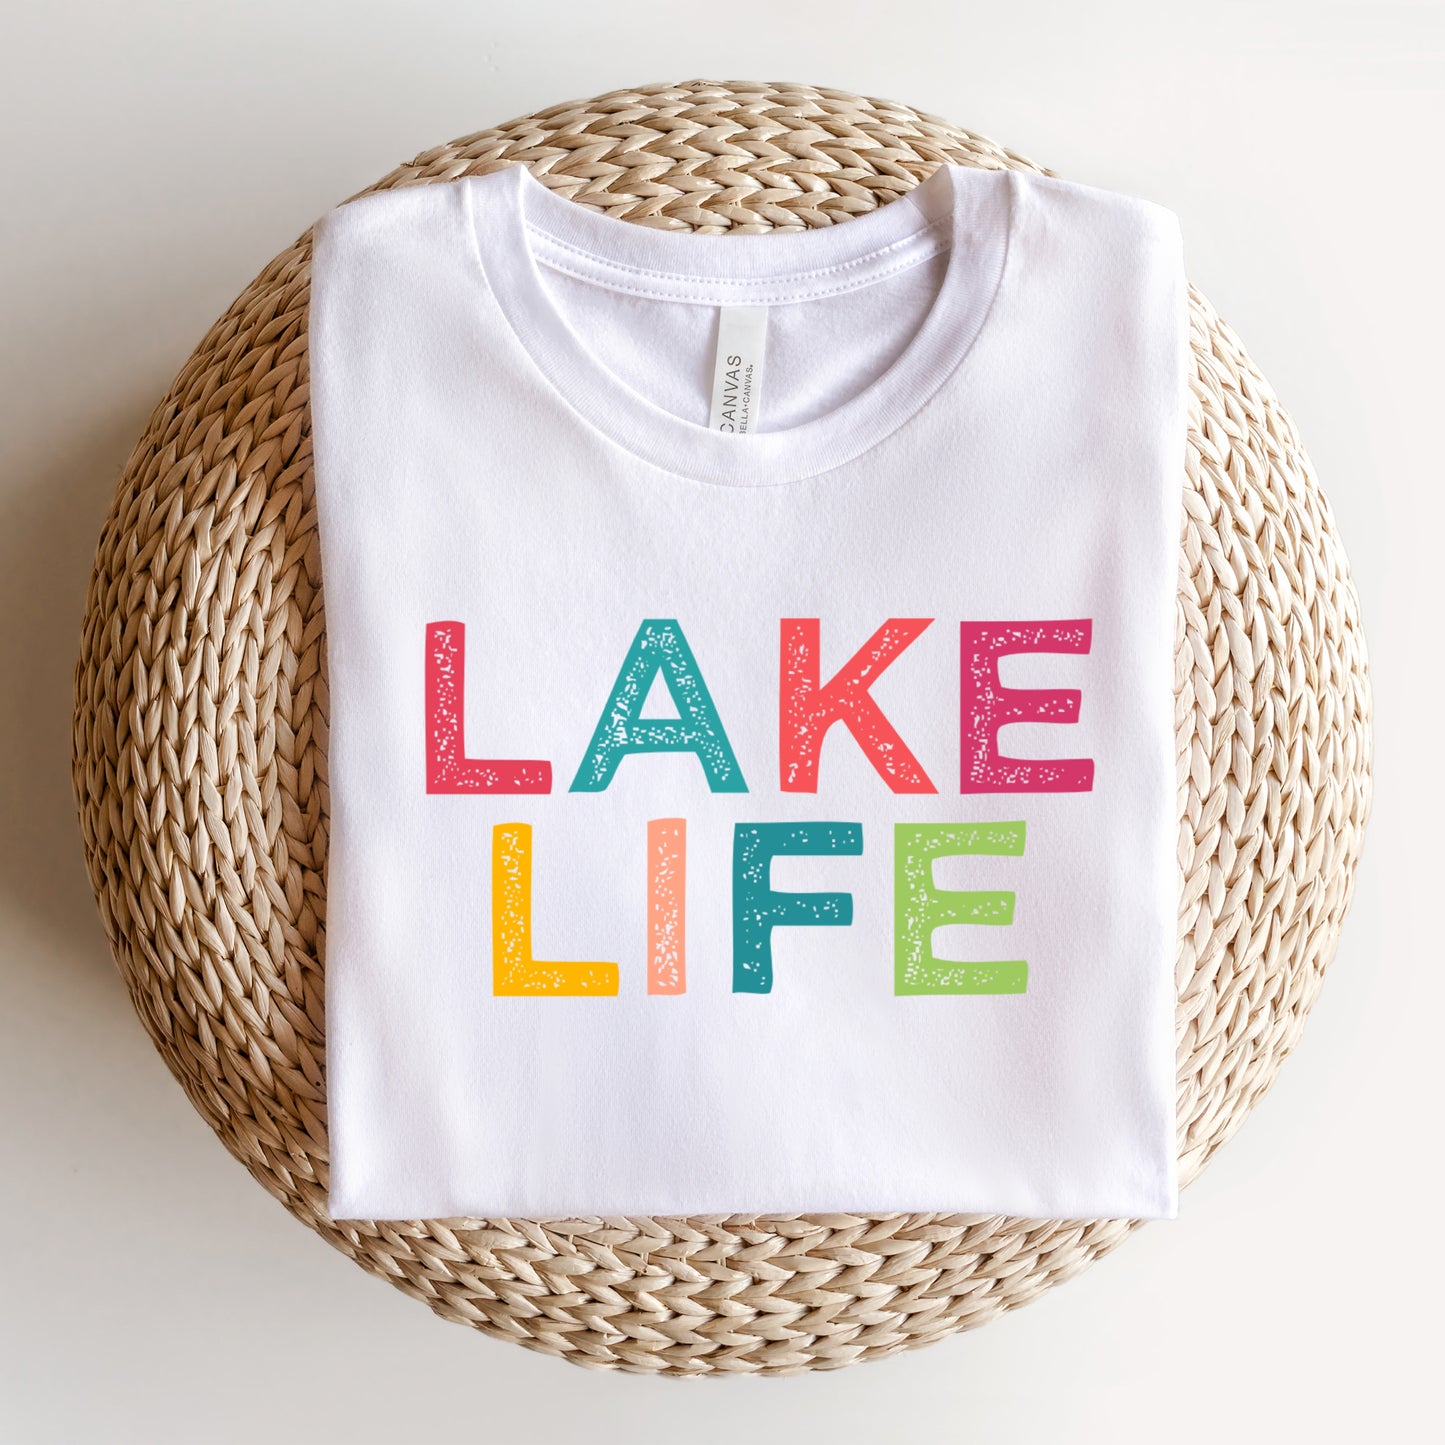 Lake Life Colorful | Short Sleeve Graphic Tee